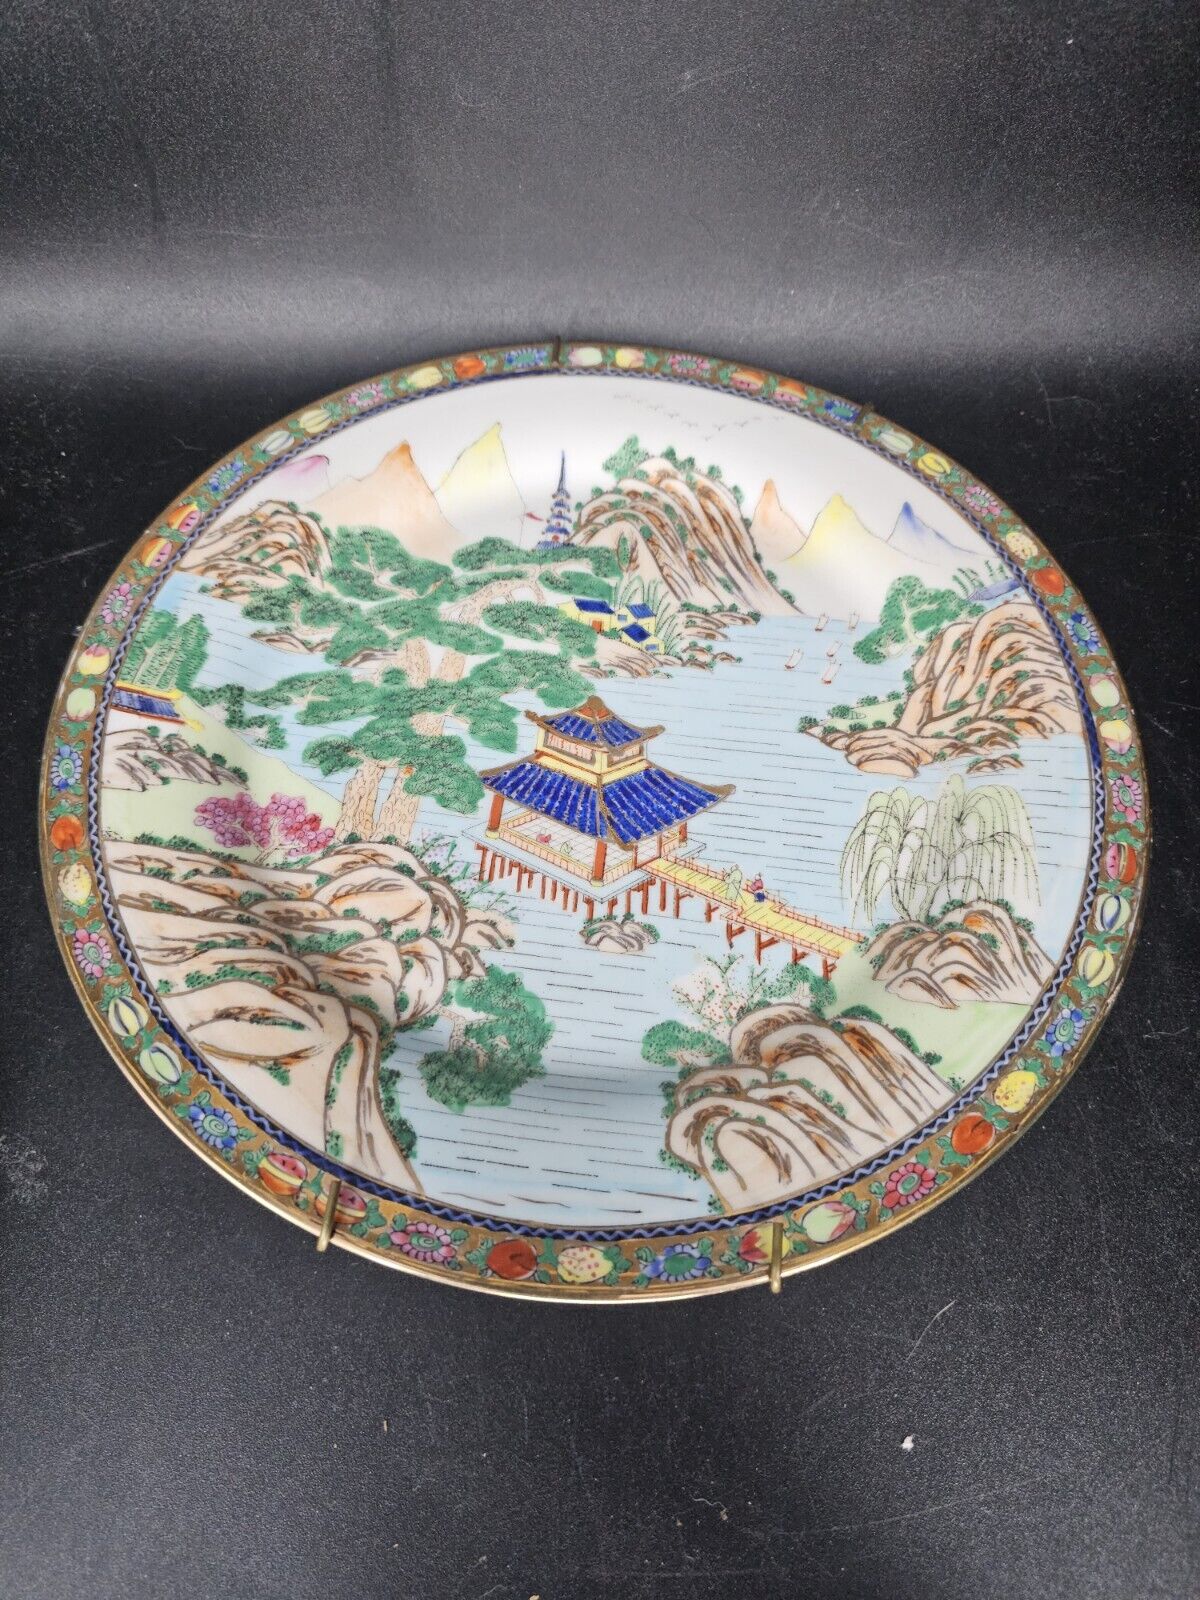 Vintage Handpainted Chinese Pagoda Scene With Mountains